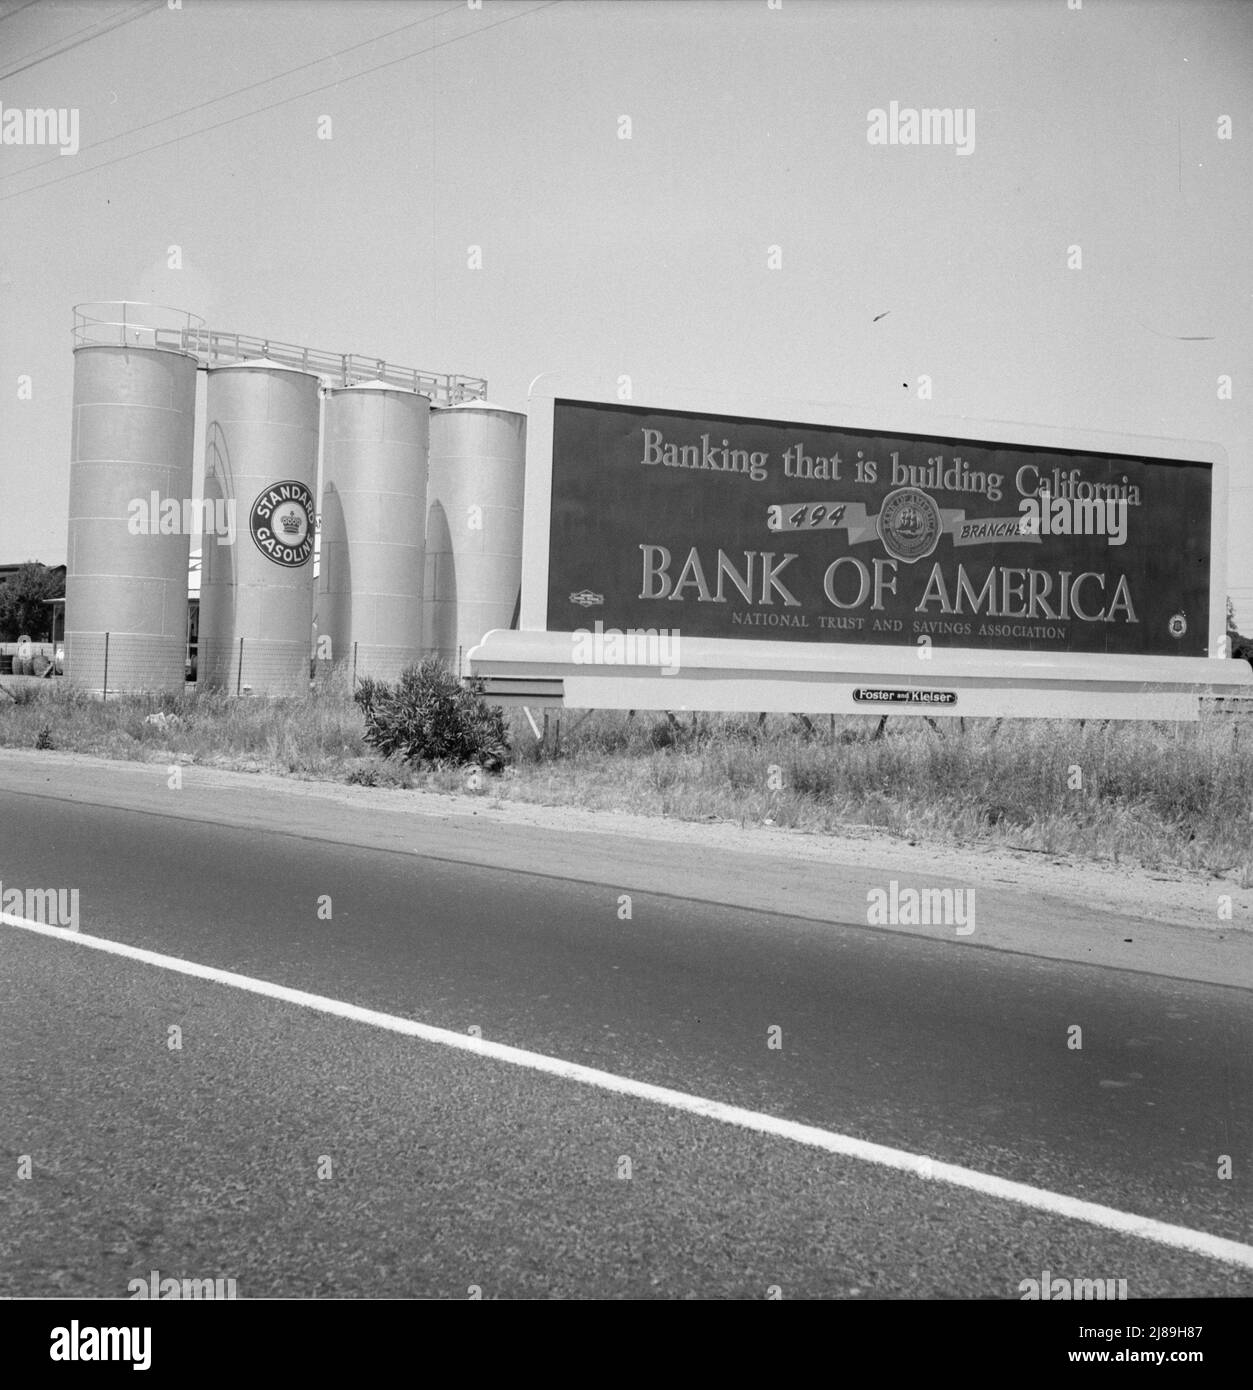 Between Tulare and Fresno on U.S. 99. Highway gas tanks and signboard approaching town. ['Standard Gasoline; Banking that is building California - 494 Branches - Bank of America - National Trust and Savings Association']. Stock Photo